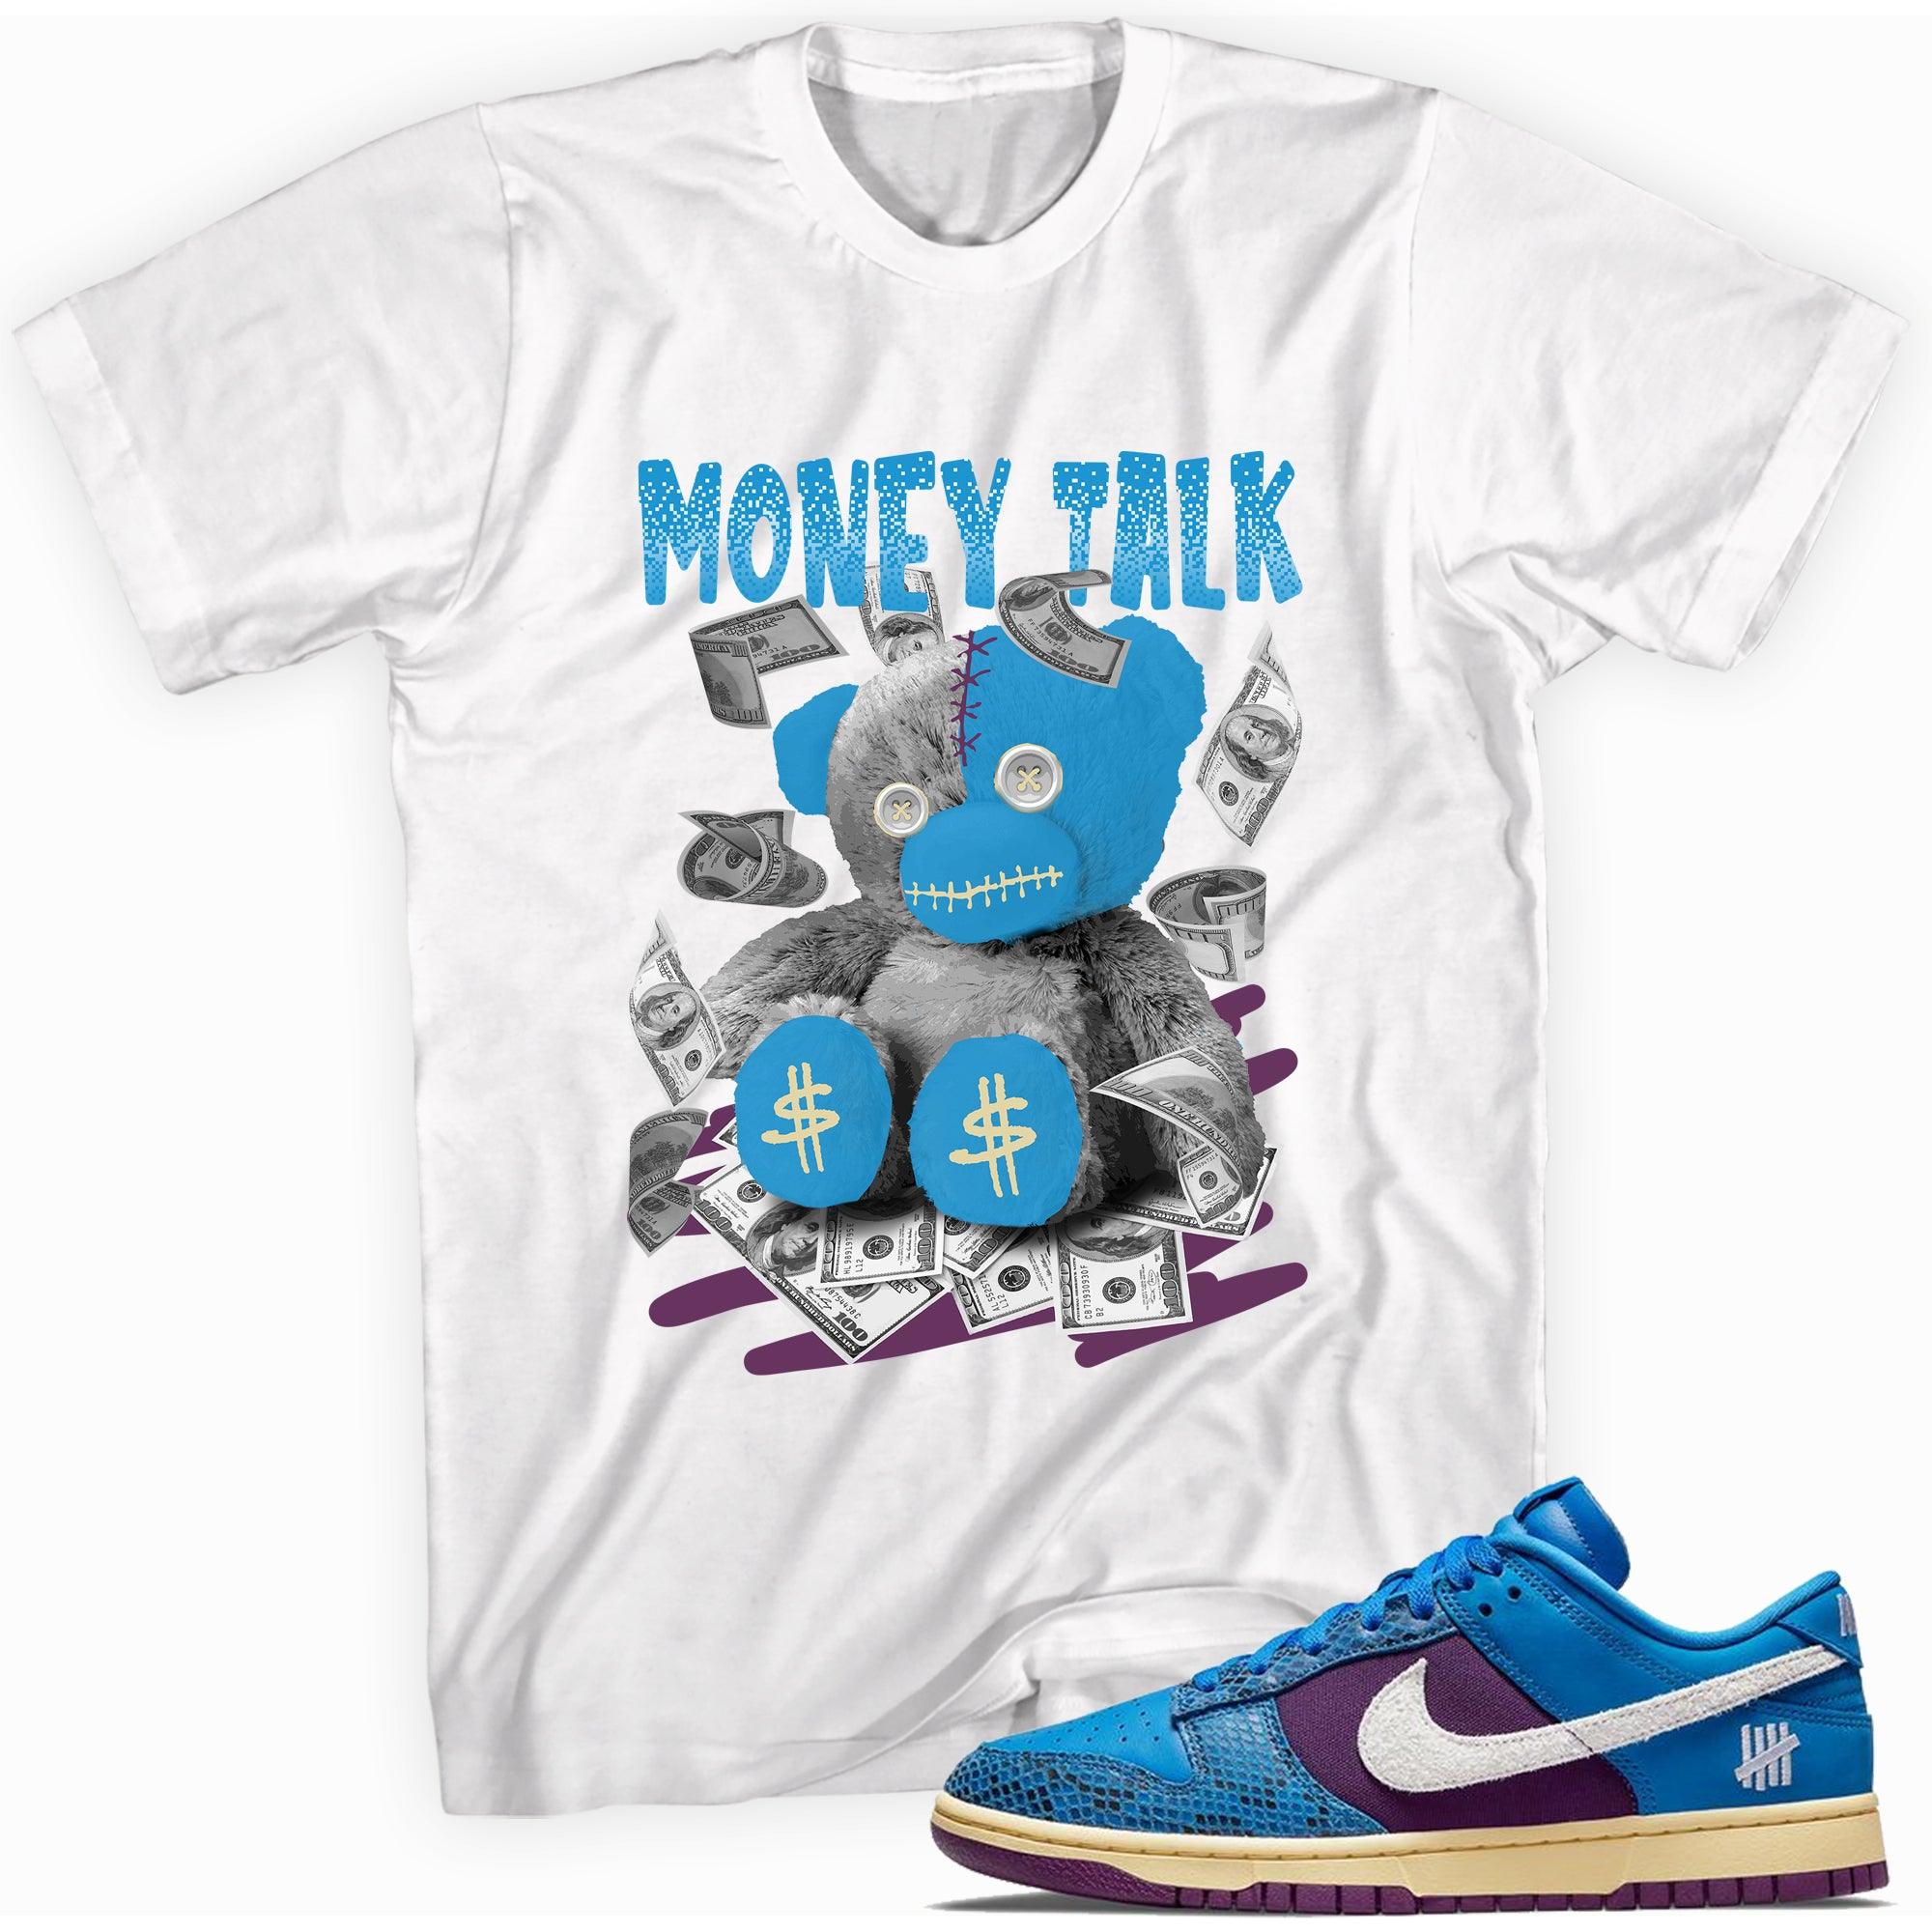 Money Talk Shirt Nike Dunk Low Undefeated 5 On It Dunk vs AF1 photo